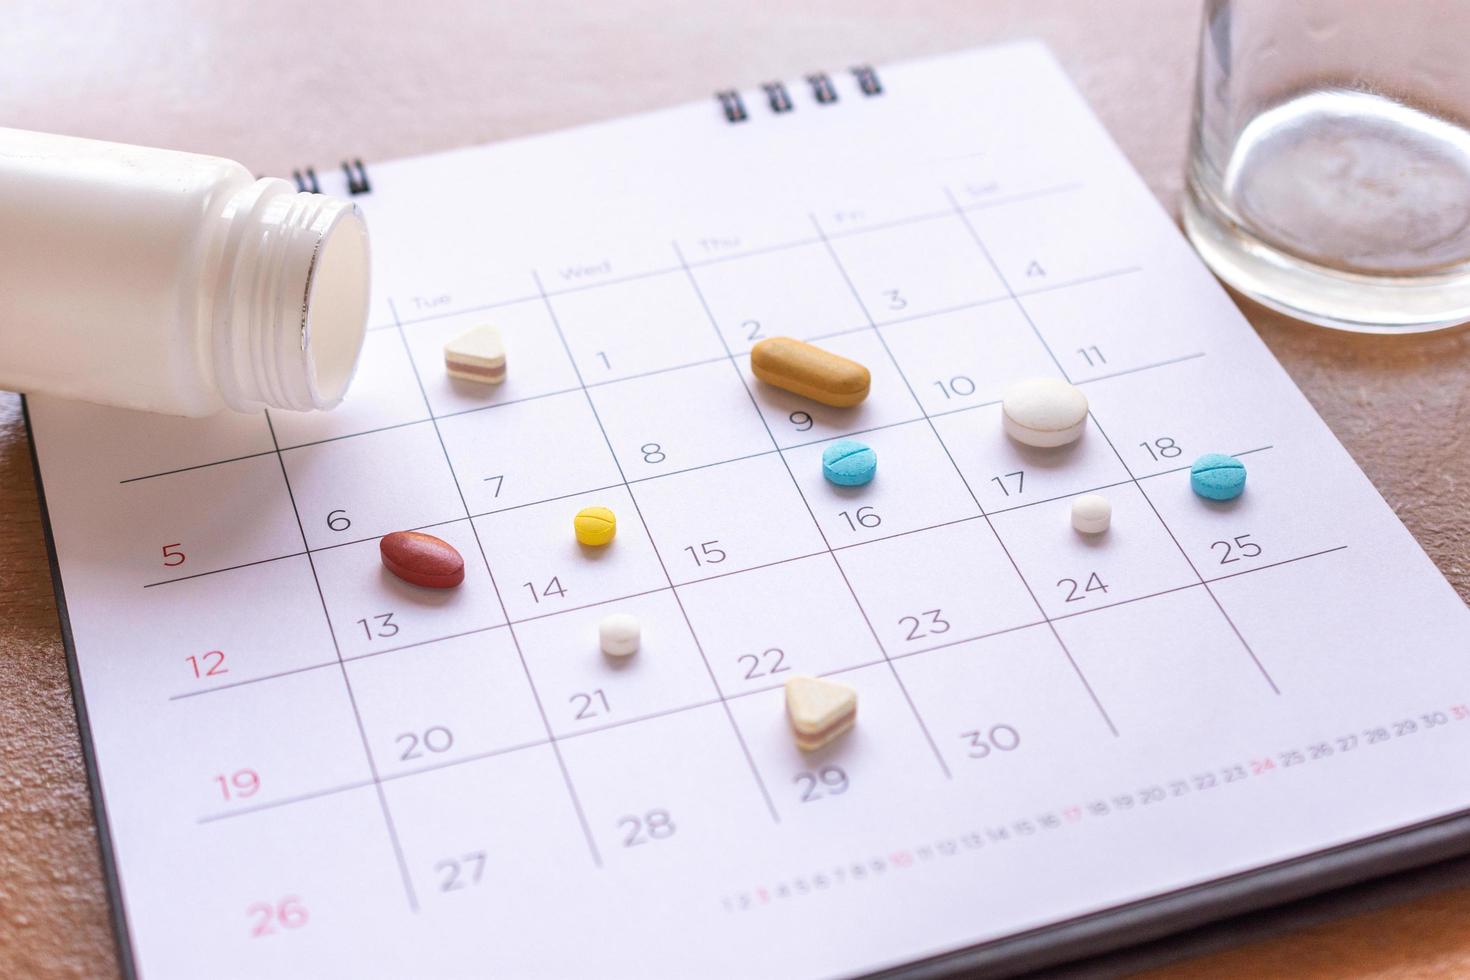 bunch of different pills on a calendar background. concept Healthcare photo